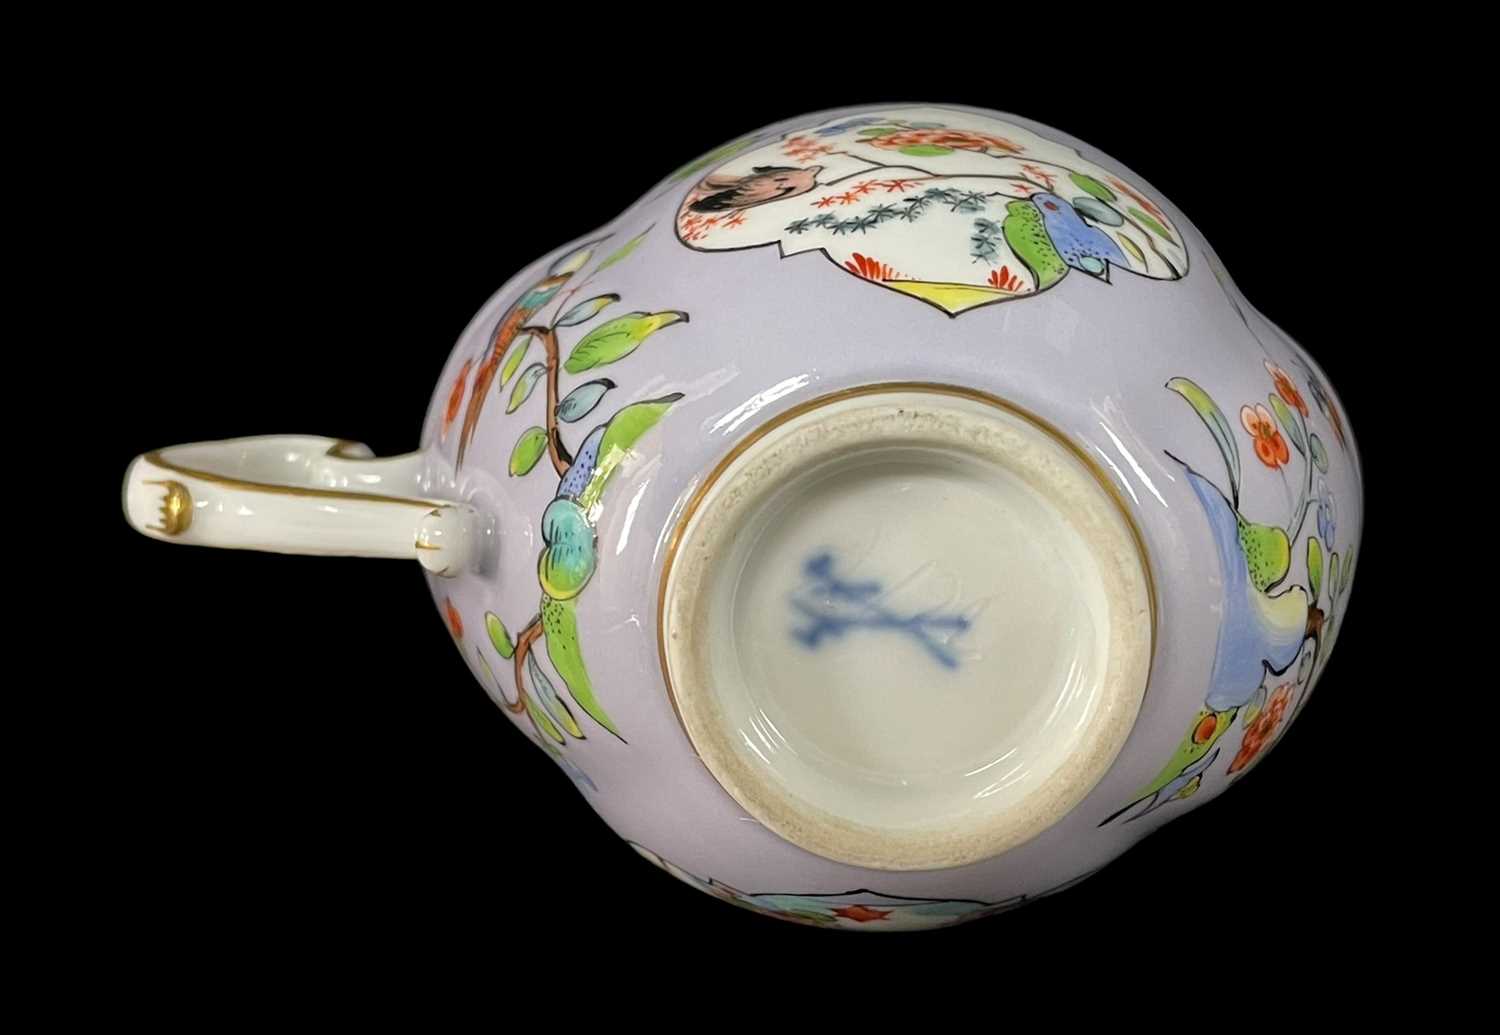 MEISSEN PORCELAIN KAKIEMON-STYLE CUP & SAUCER, quatrefoil shape, painted in the Japanese style - Image 5 of 5